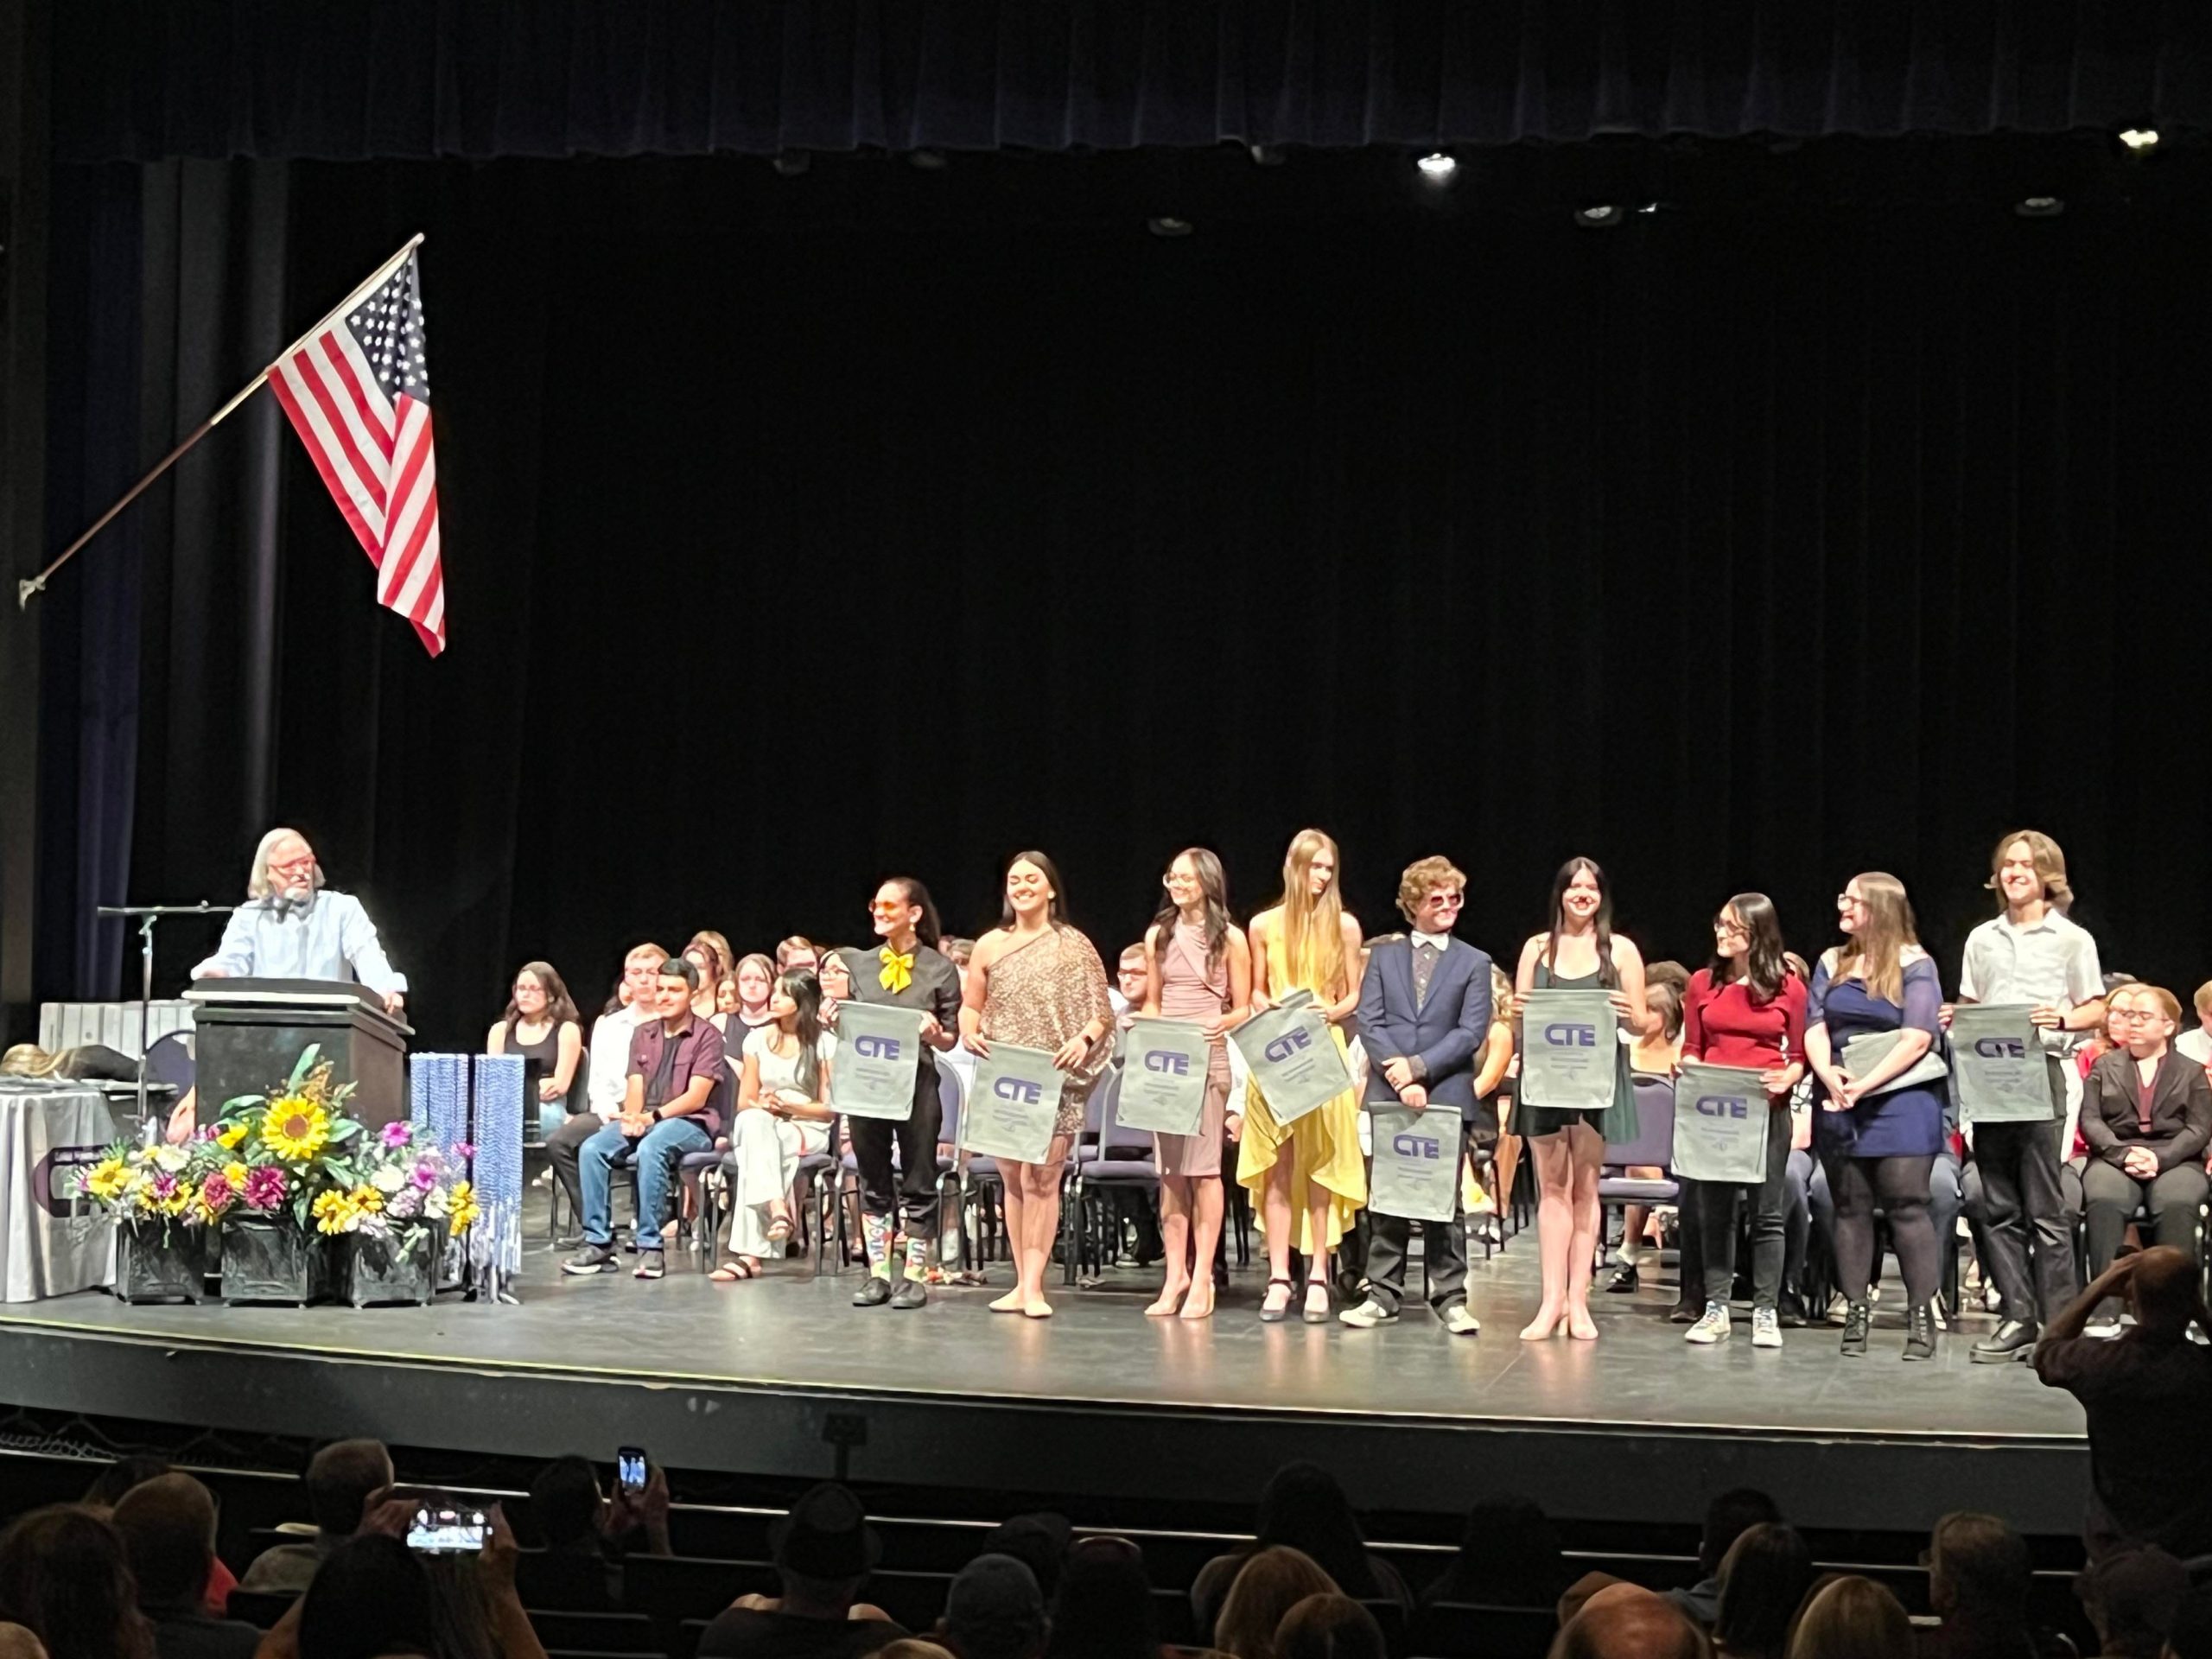 CTE Students Recognized  At Annual Shining Knights Awards Ceremony